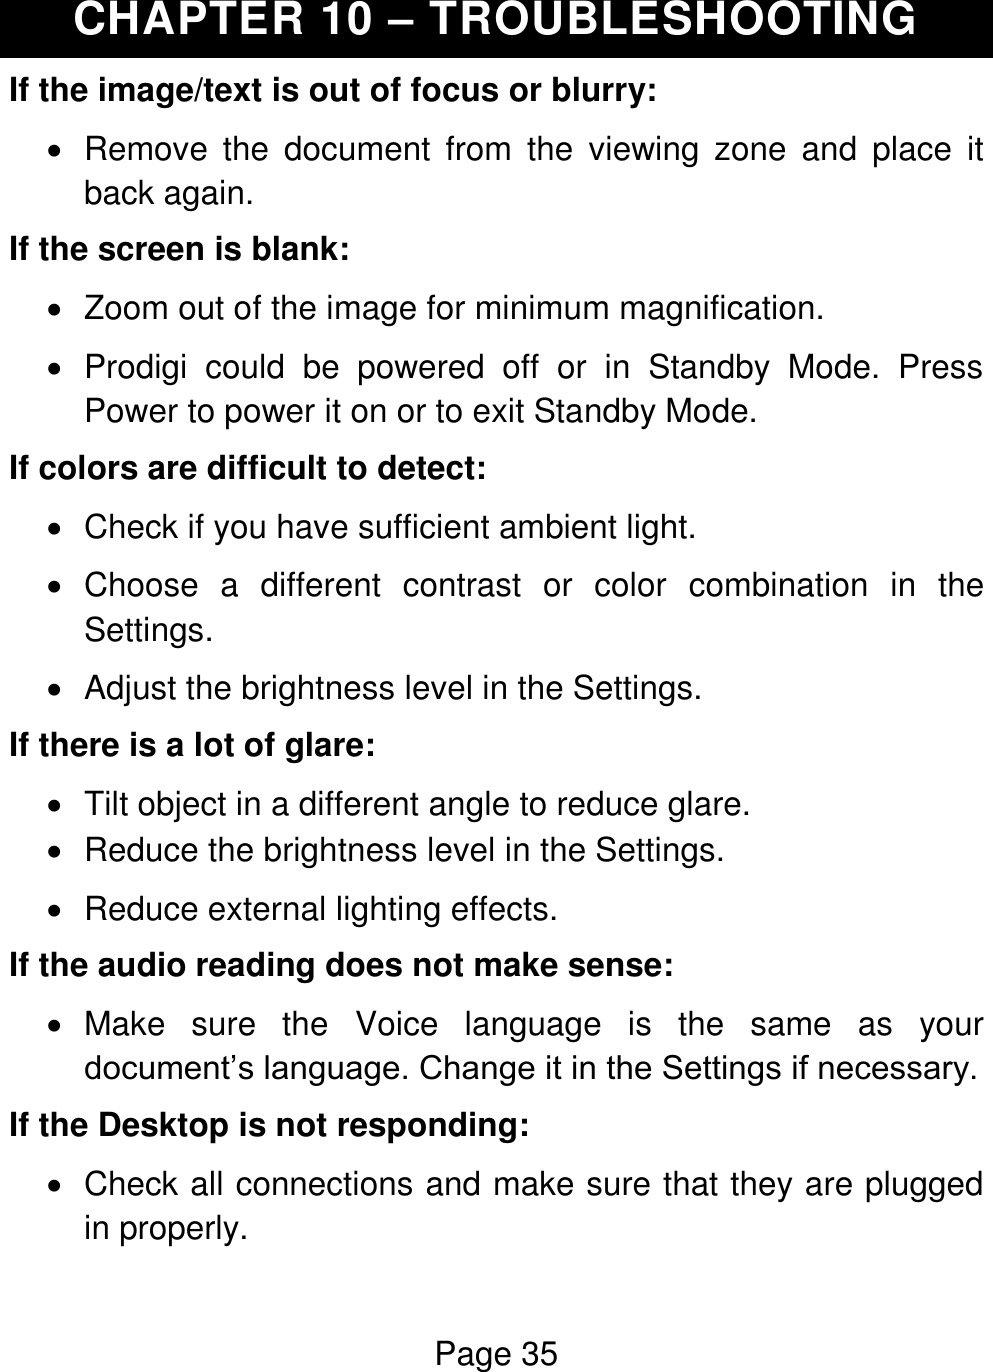 Page 35  CHAPTER 10 – TROUBLESHOOTING If the image/text is out of focus or blurry:   Remove  the  document  from  the  viewing  zone  and  place  it back again.  If the screen is blank:   Zoom out of the image for minimum magnification.   Prodigi  could  be  powered  off  or  in  Standby  Mode.  Press Power to power it on or to exit Standby Mode. If colors are difficult to detect:   Check if you have sufficient ambient light.    Choose  a  different  contrast  or  color  combination  in  the Settings.    Adjust the brightness level in the Settings. If there is a lot of glare:   Tilt object in a different angle to reduce glare.   Reduce the brightness level in the Settings.   Reduce external lighting effects. If the audio reading does not make sense:   Make  sure  the  Voice  language  is  the  same  as  your document’s language. Change it in the Settings if necessary.  If the Desktop is not responding:   Check all connections and make sure that they are plugged in properly. 